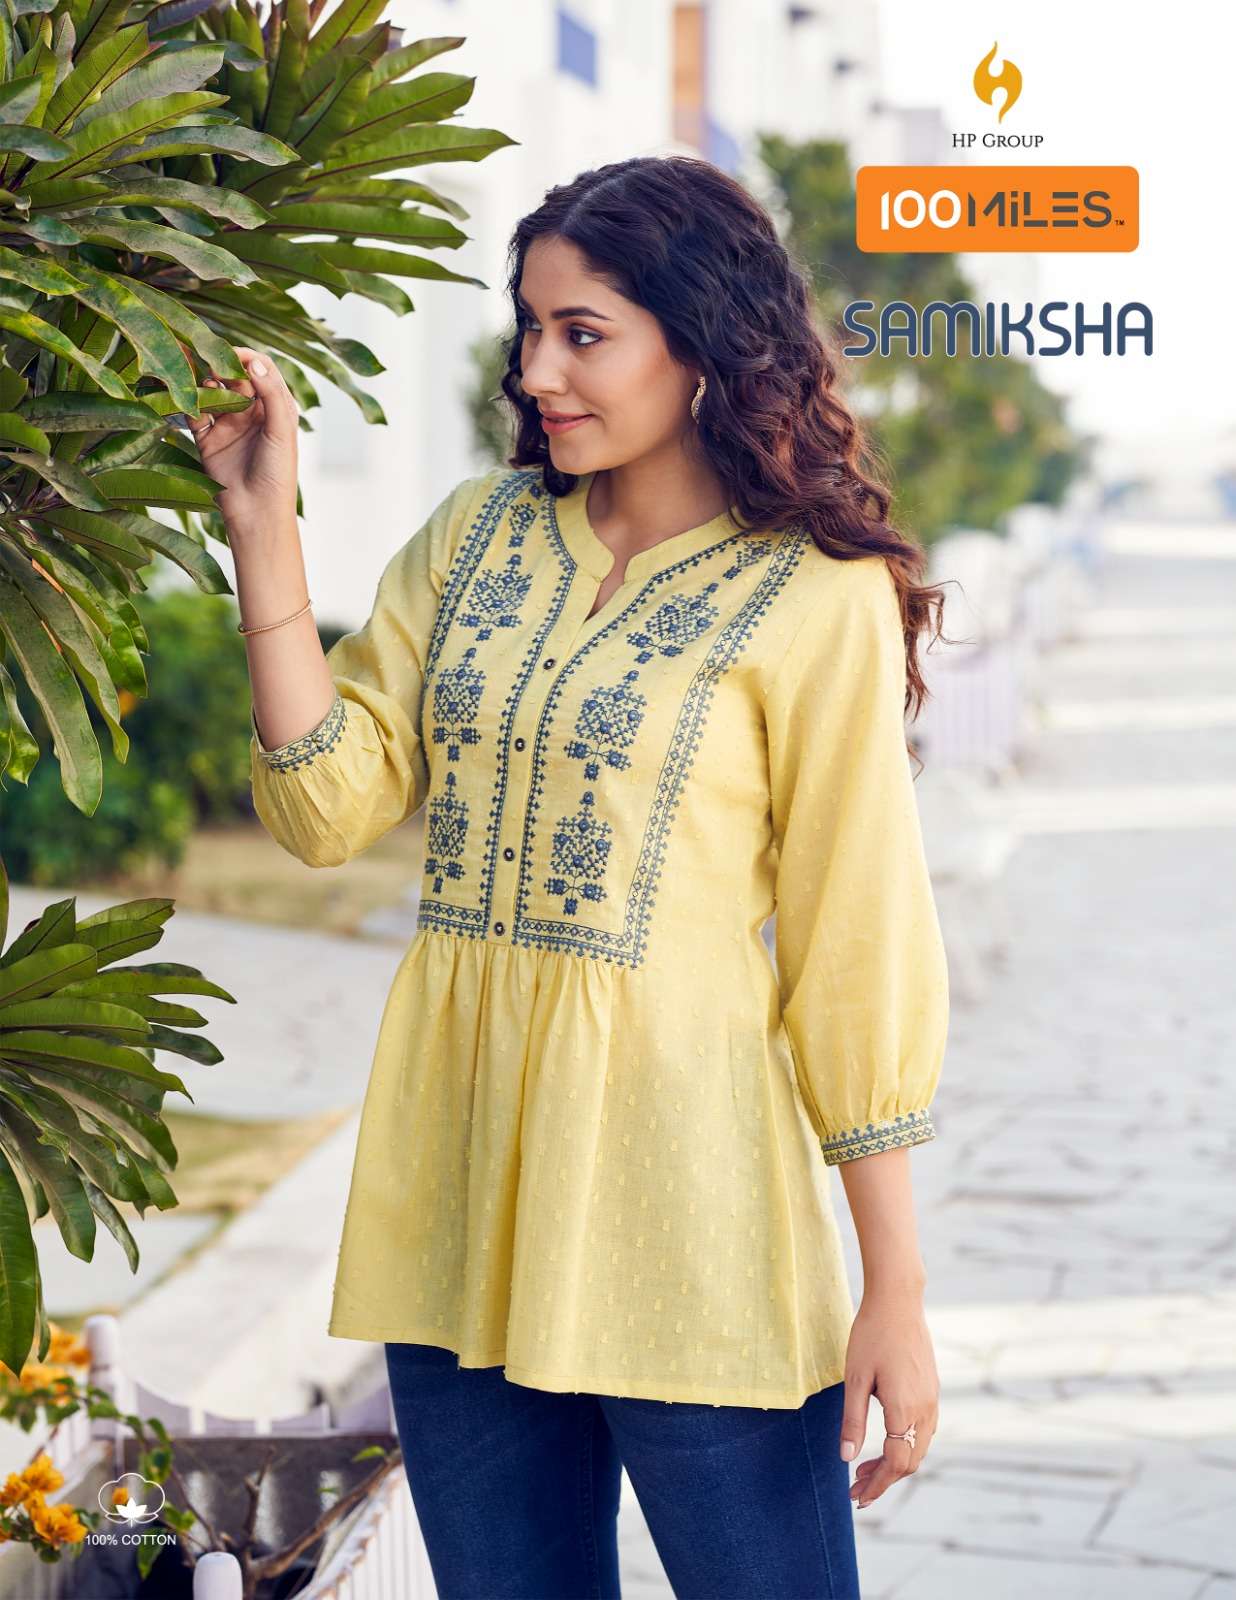 SAMIKSHA PURE COTTON DOBBY EMBROIDERED FANCY TOP BY 100MILES WHOLESALER AND DEALER